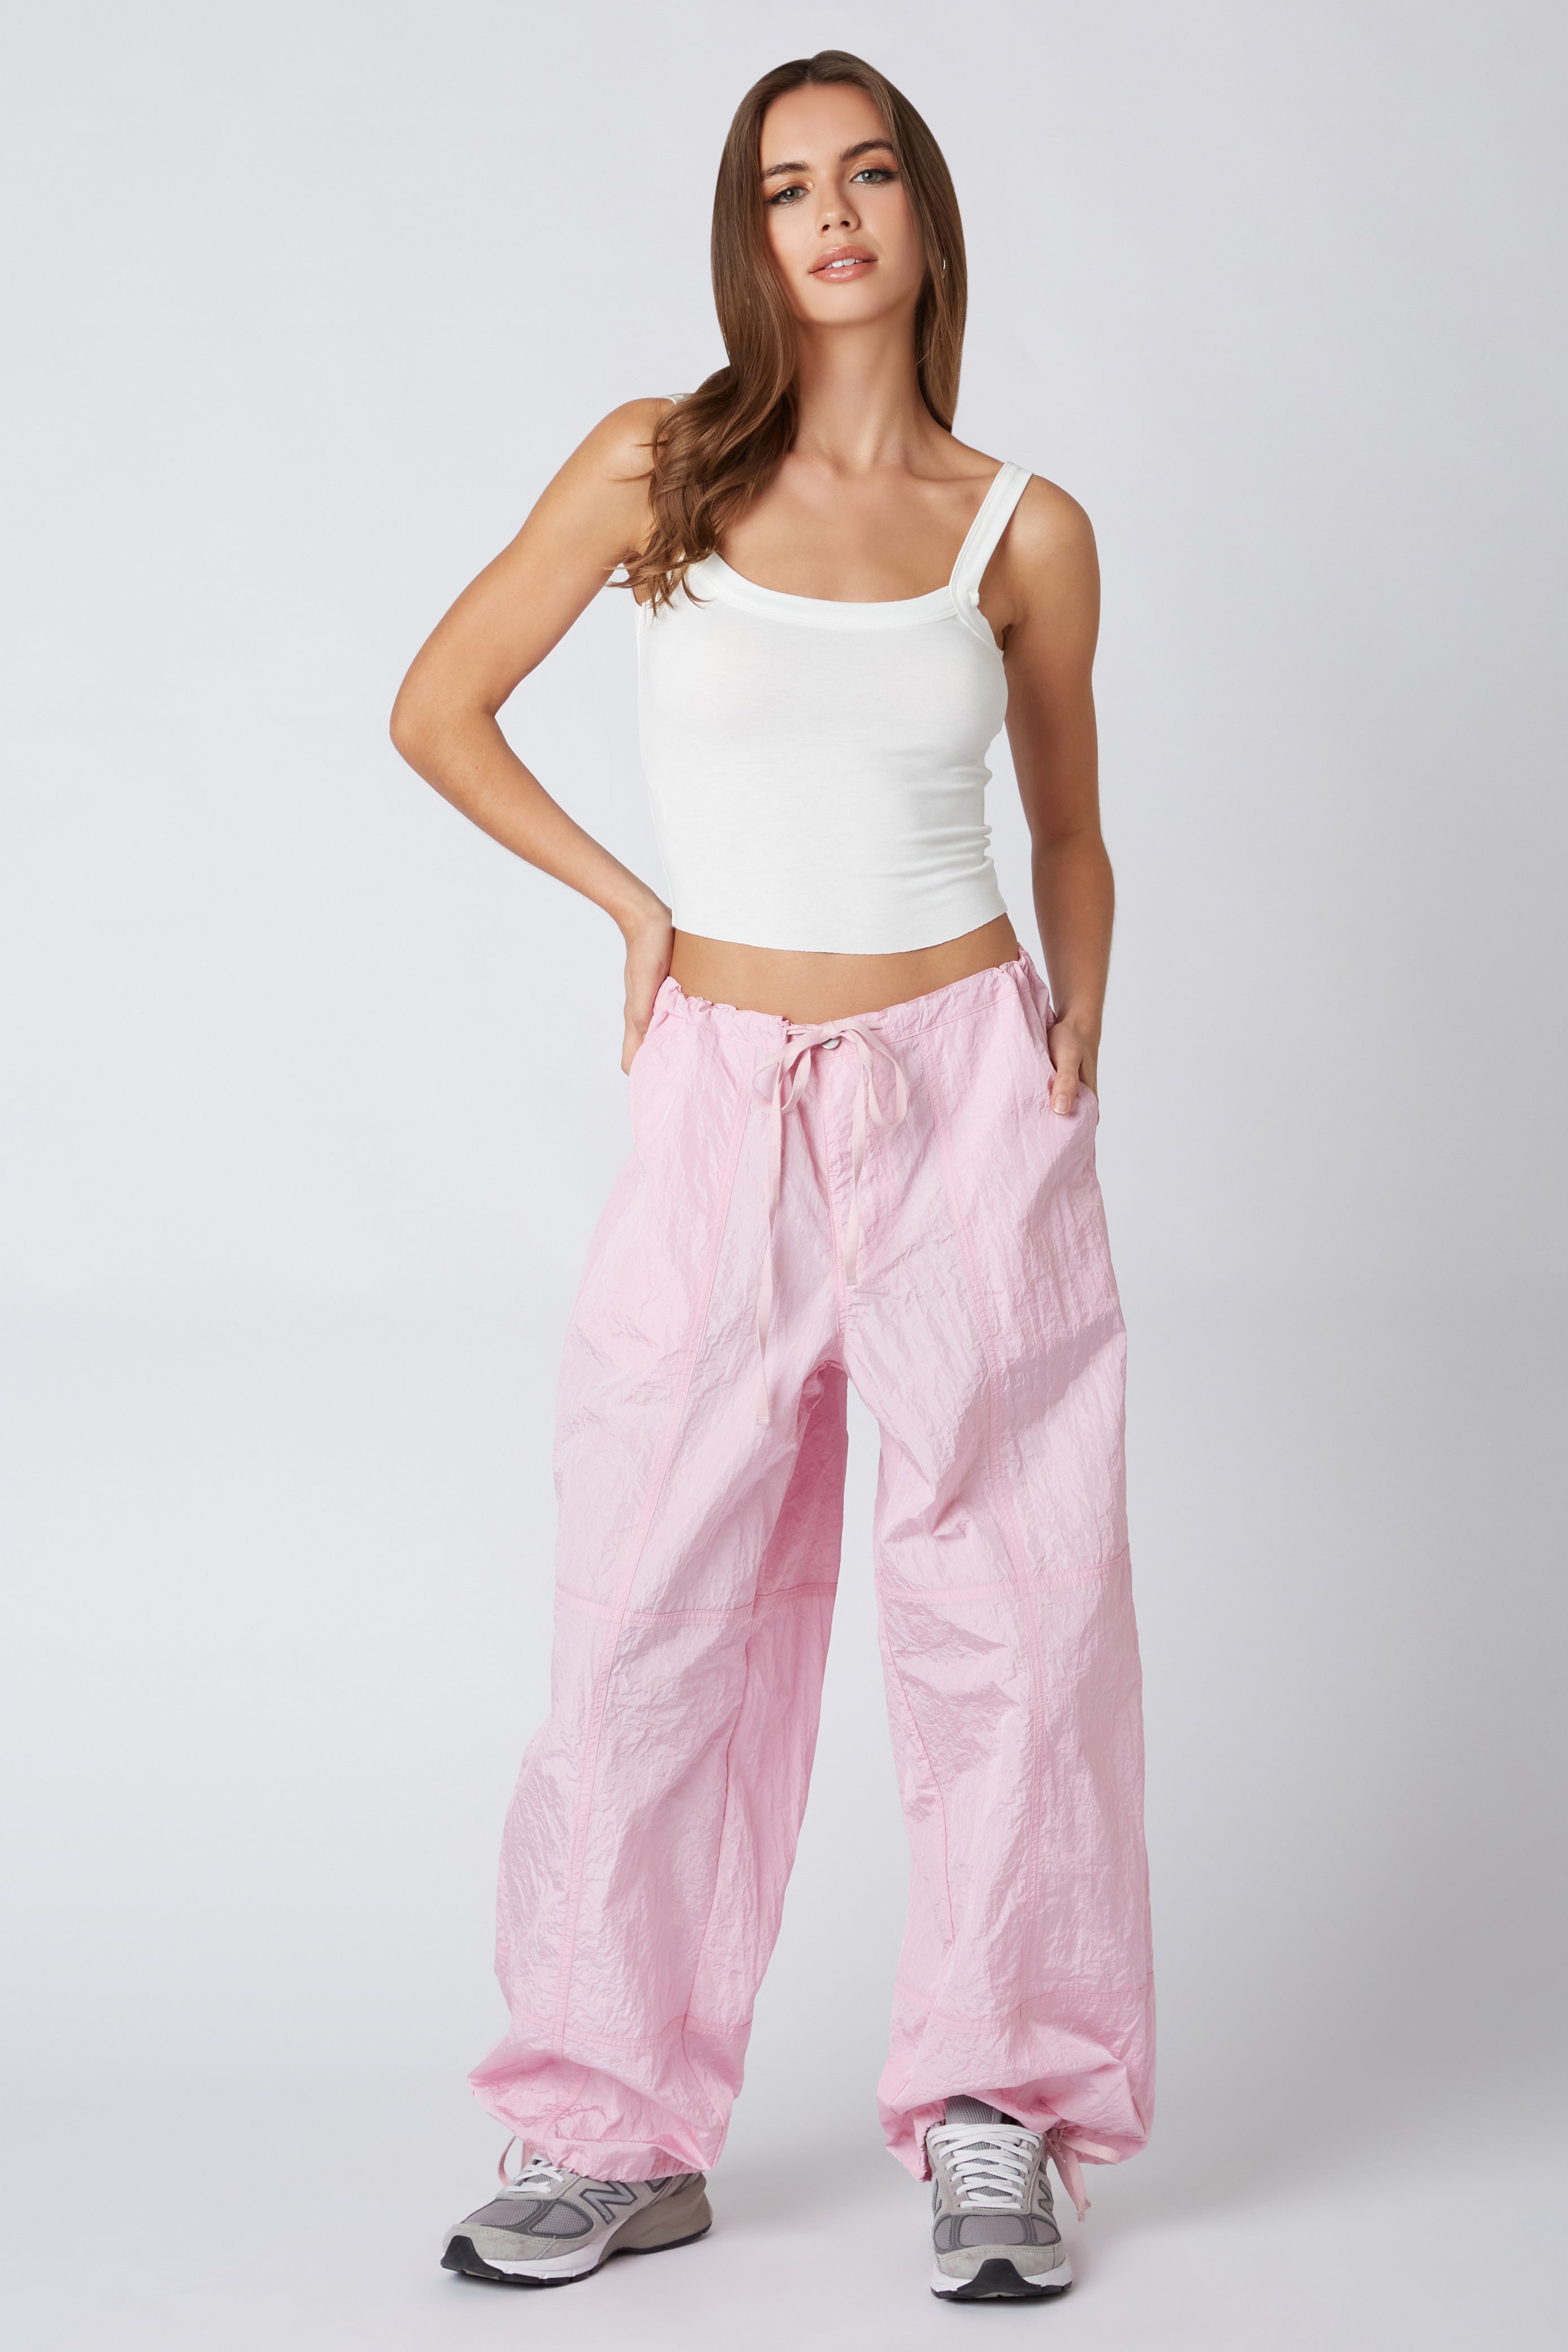 Crinkle Parachute Pant in Pink Front